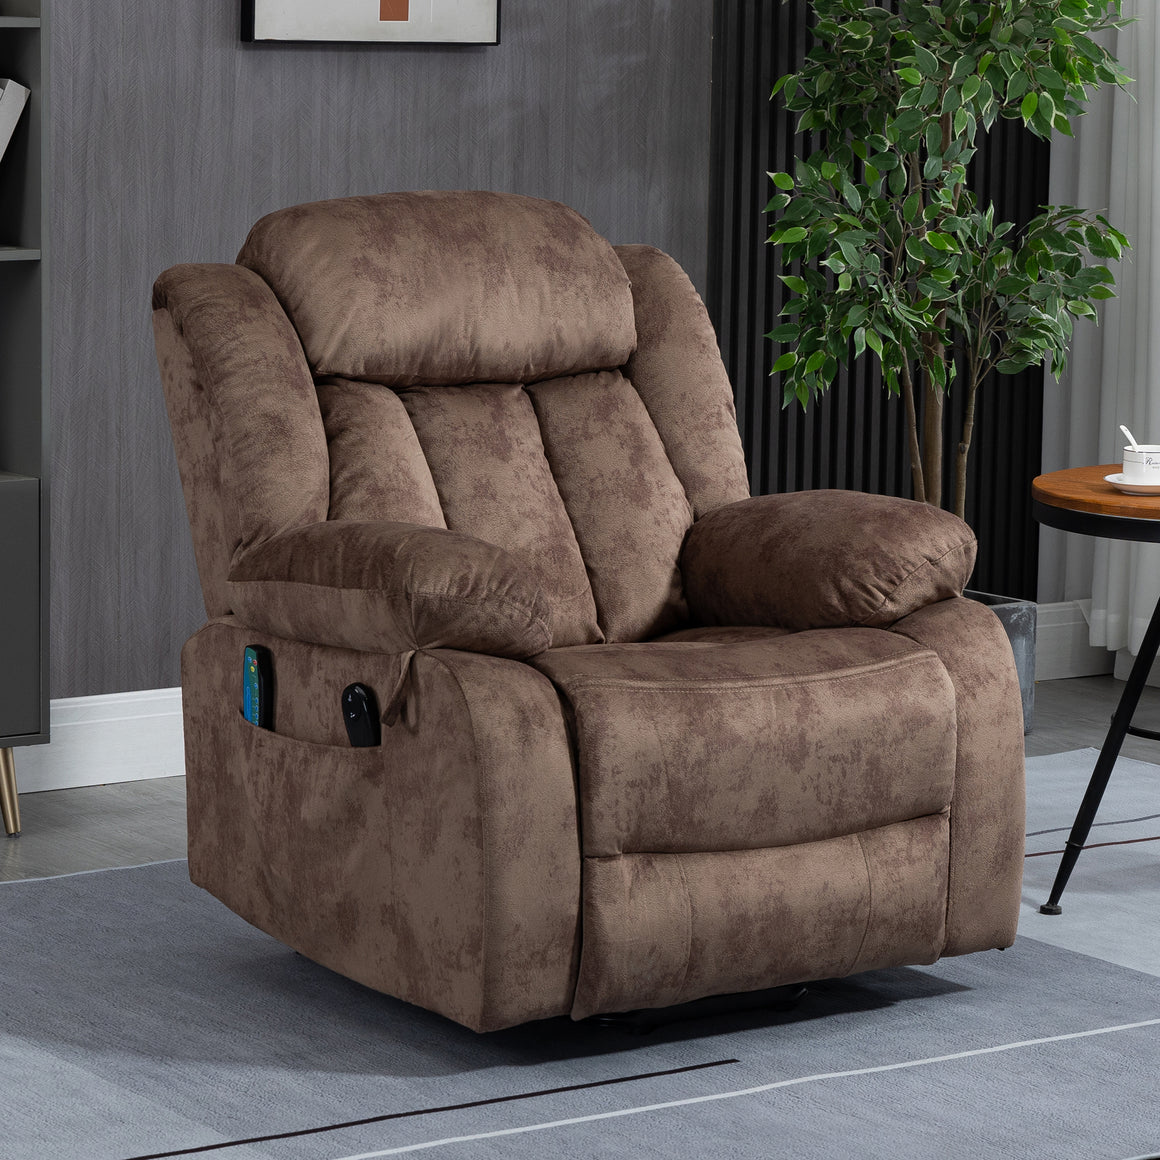 uhomepro Massage Recliner Chair, Electric Heated Power Lift Recliner Chairs for Adults, Recliner Sofa for Seniors 330 lb Capacity with 5 Vibration Modes, Heating Cushions